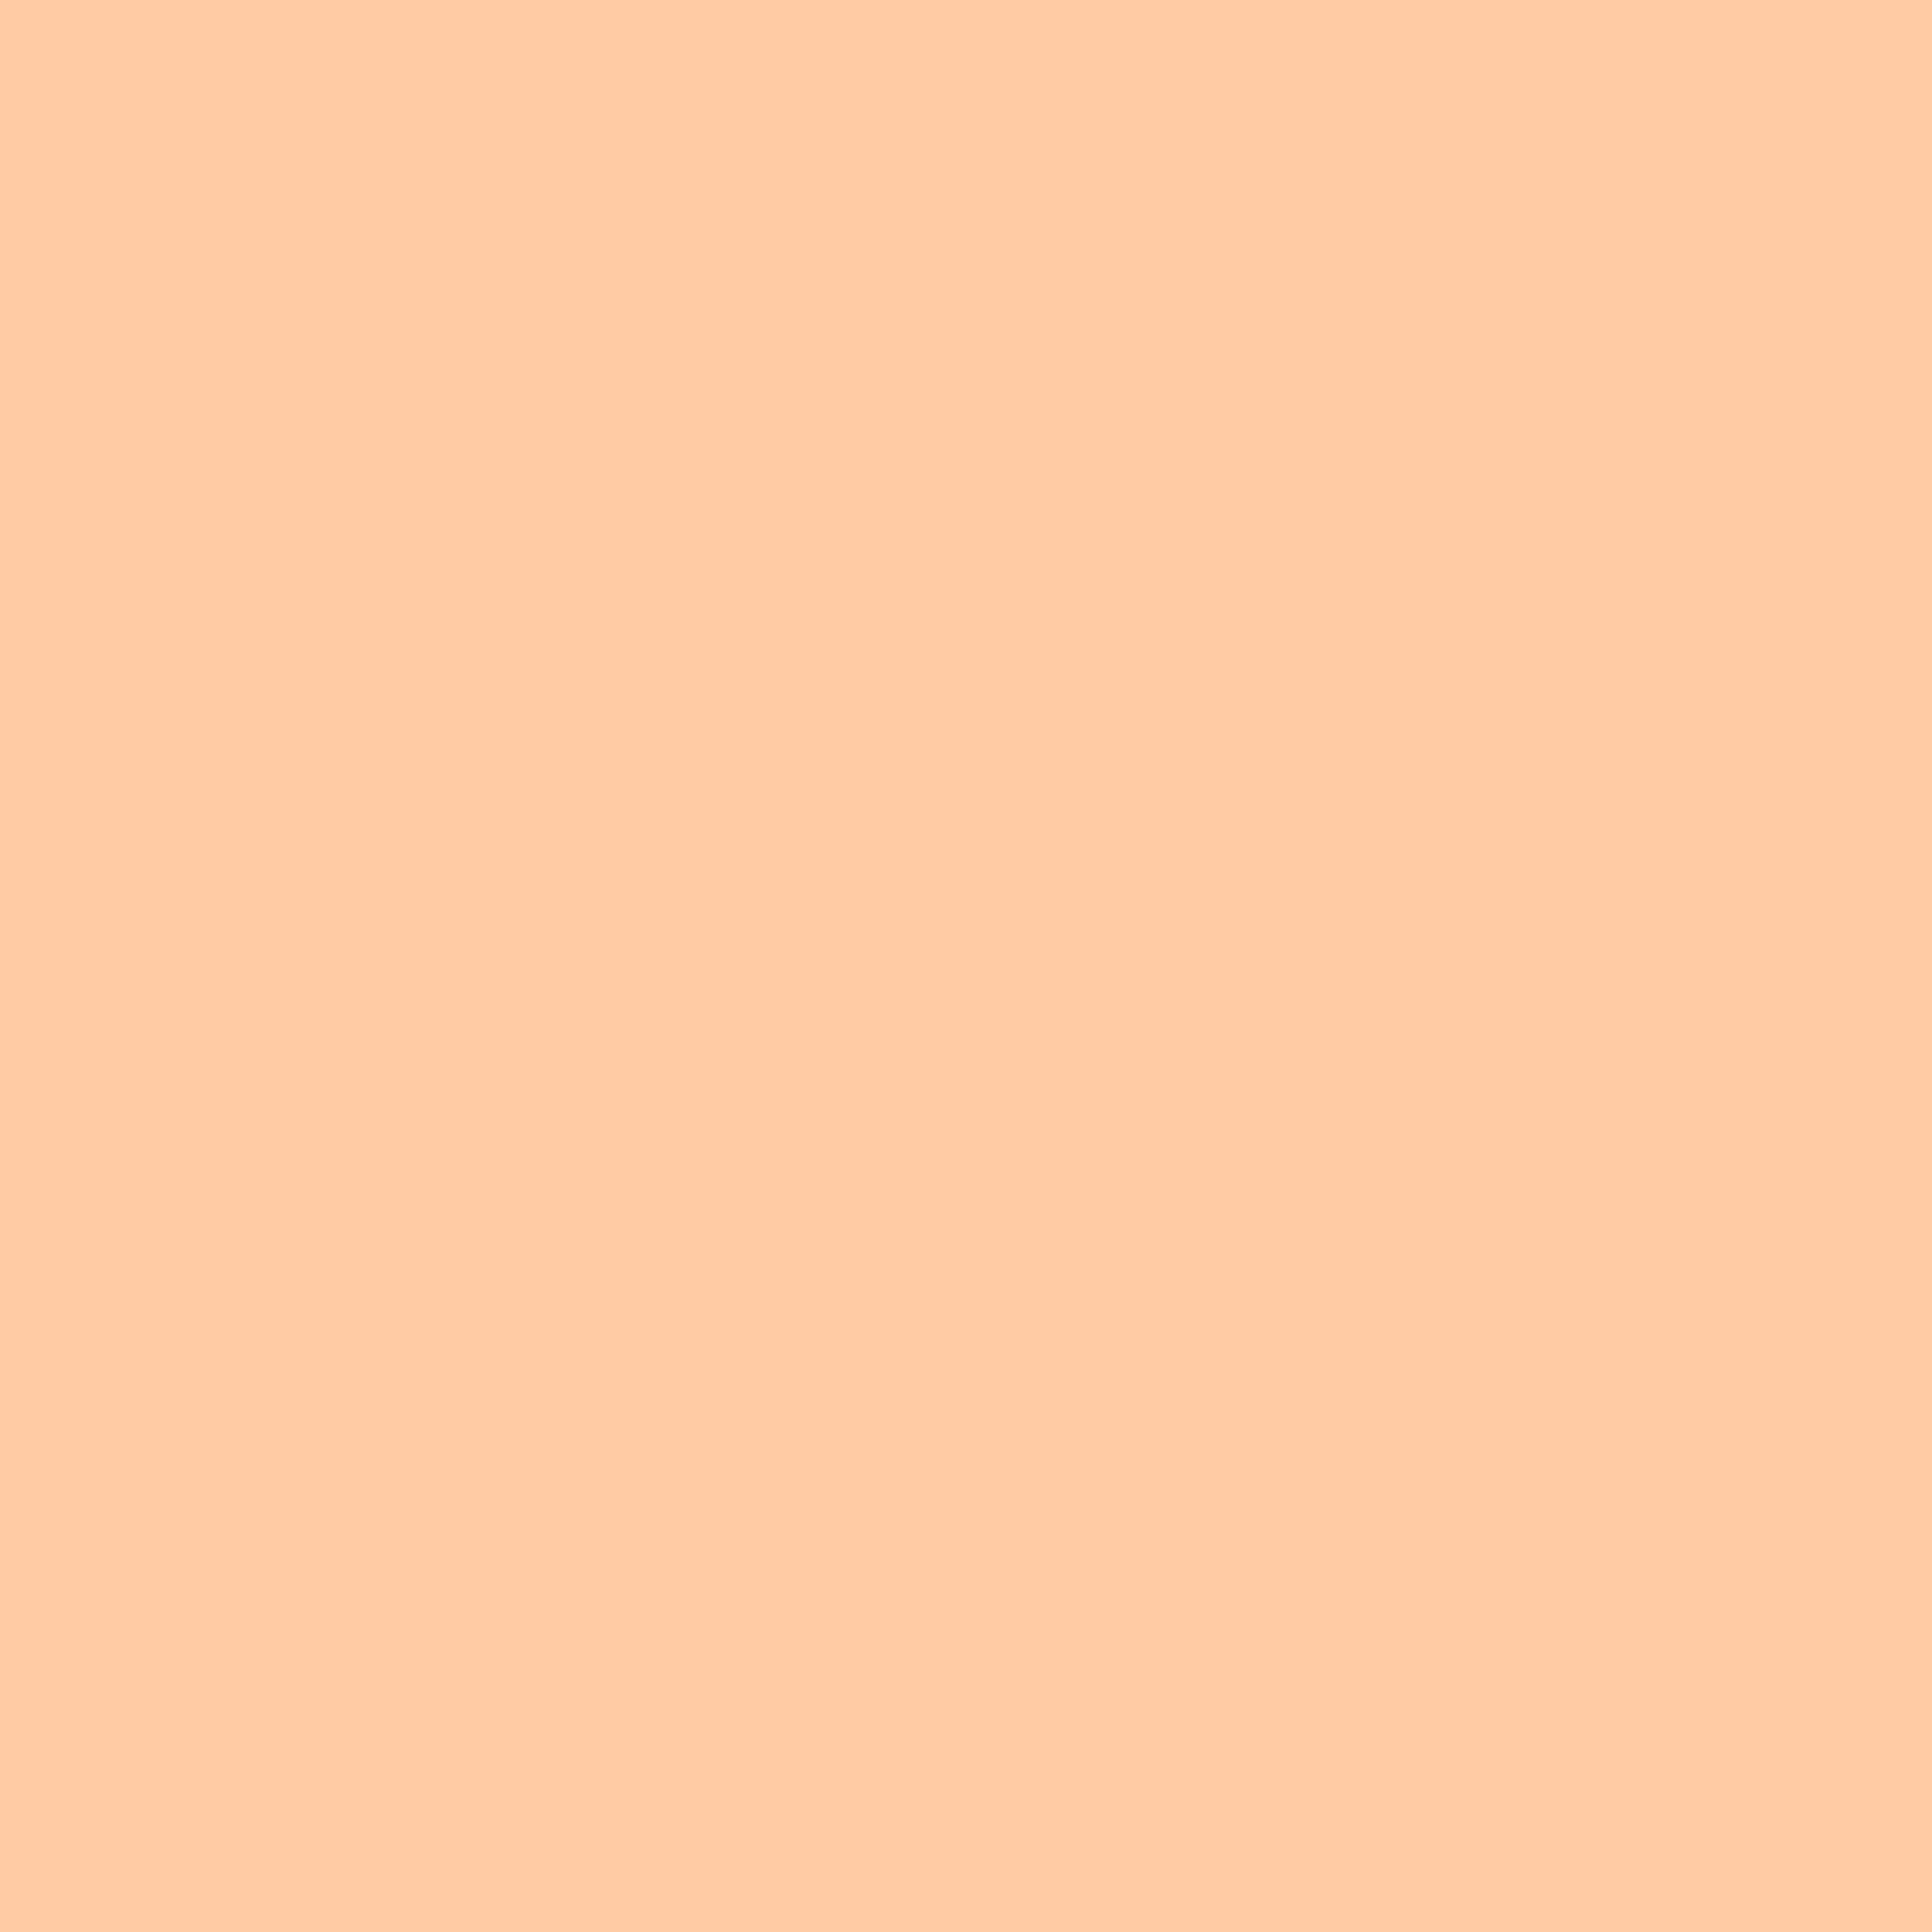 2732x2732 Deep Peach Solid Color Background